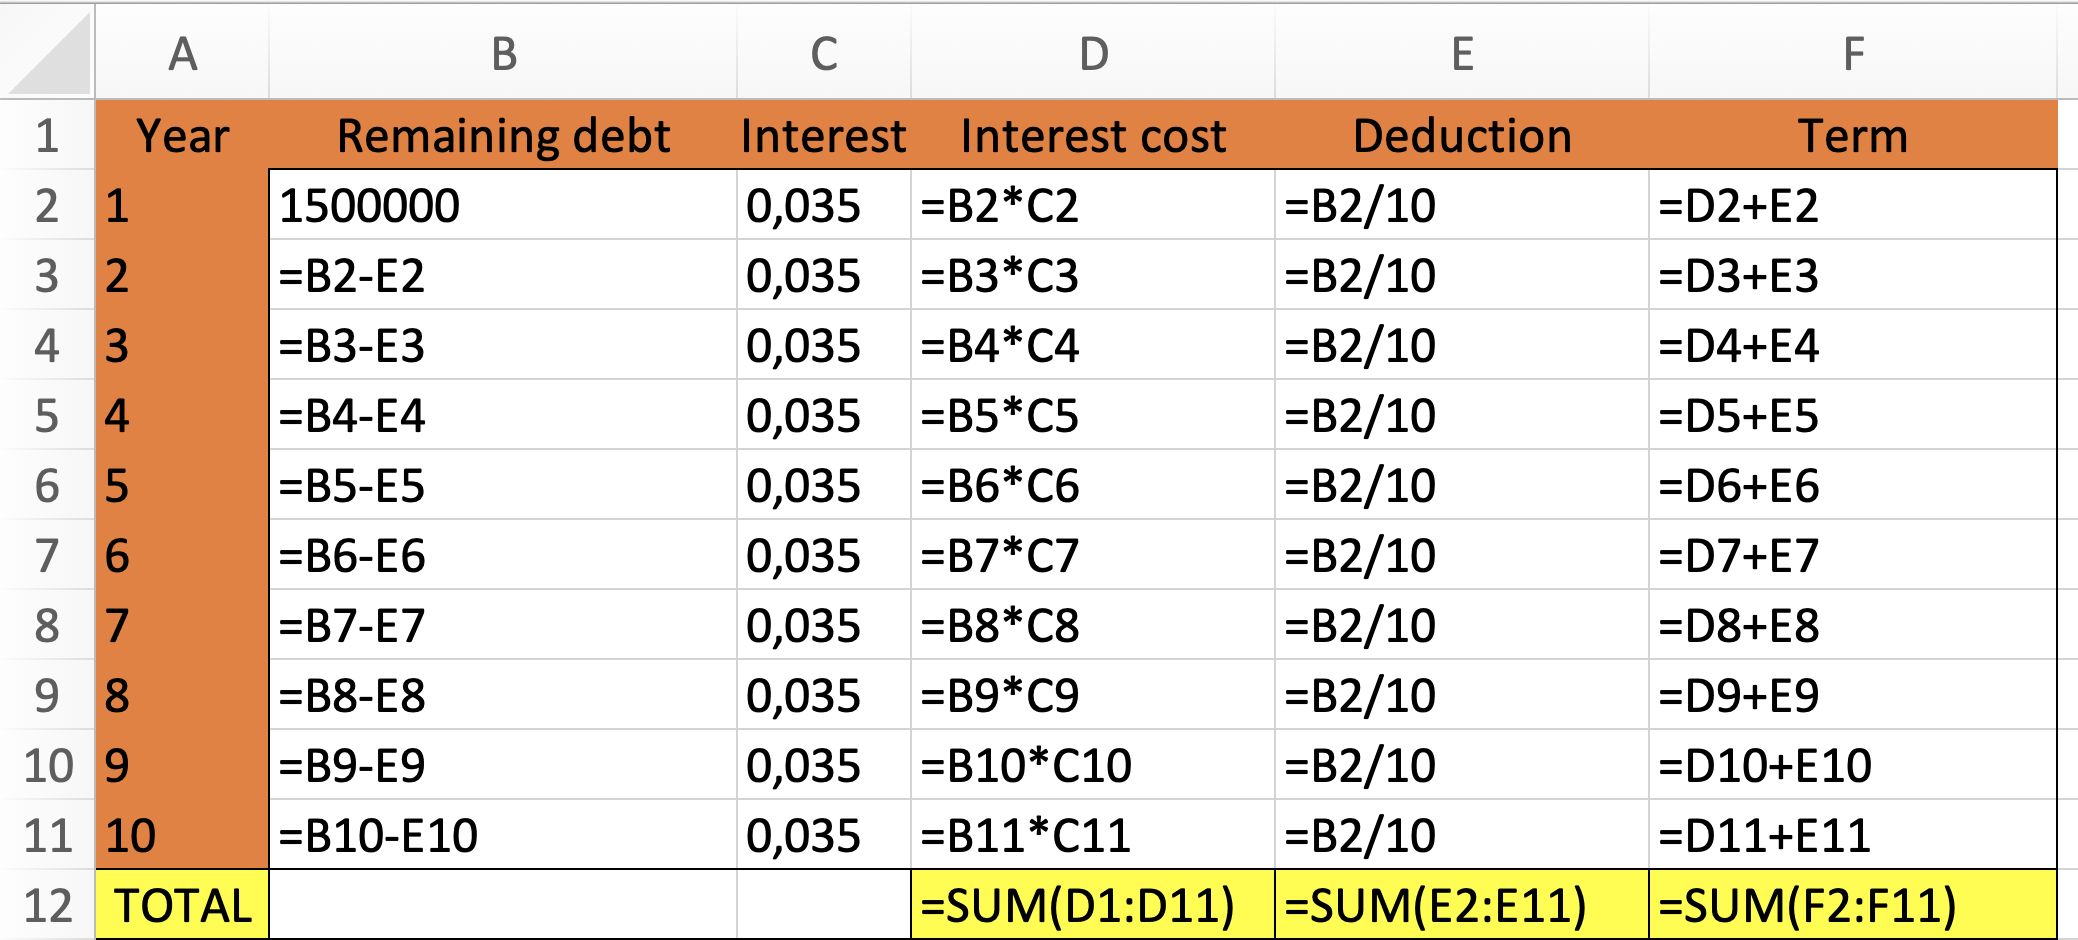 Excel spreadsheet showing the formulas used in the calculations for the image above